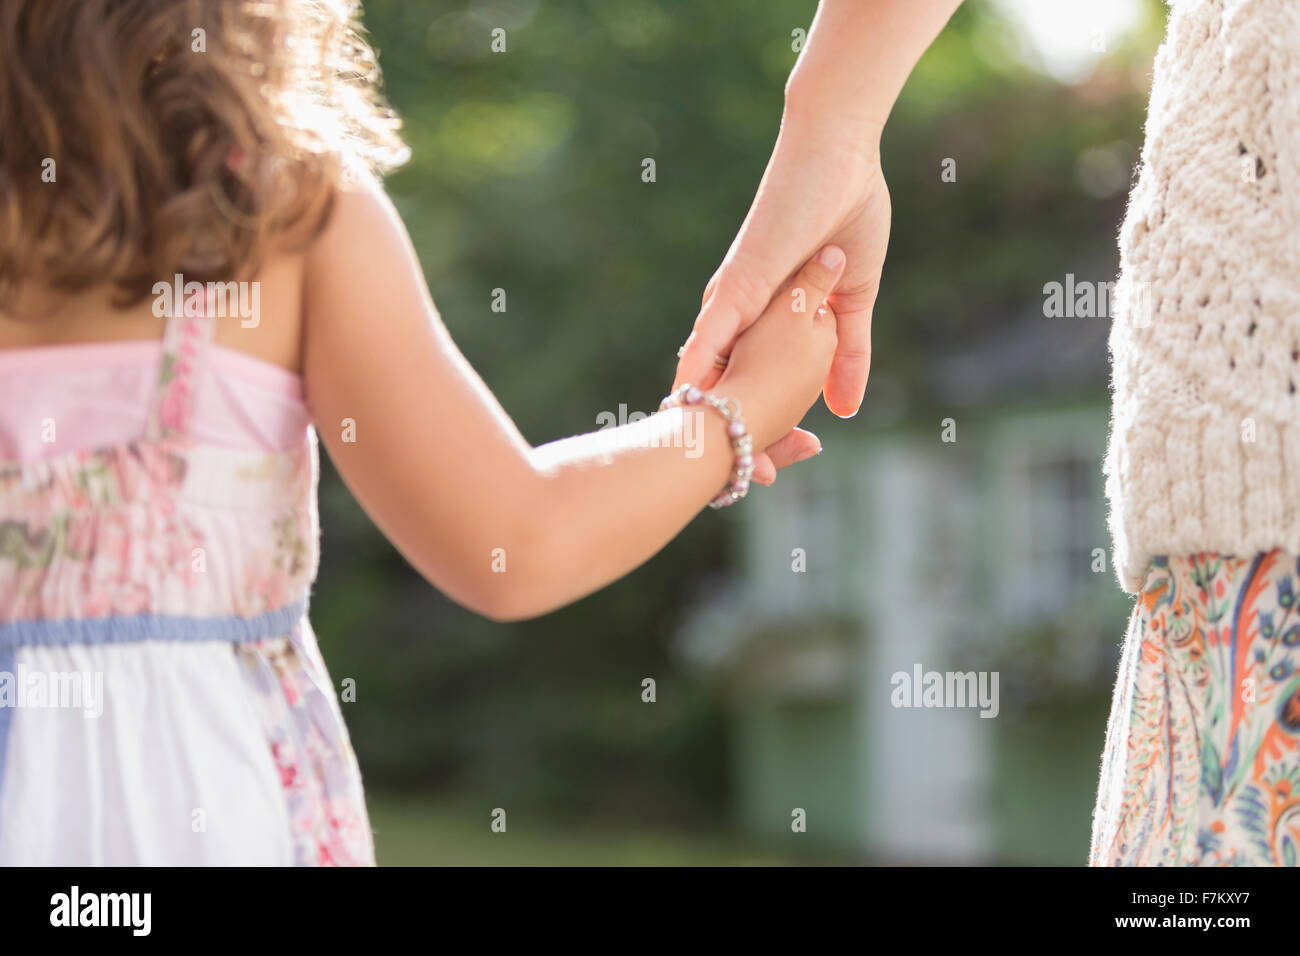 Close up rear view mother and daughter holding hands Stock Photo